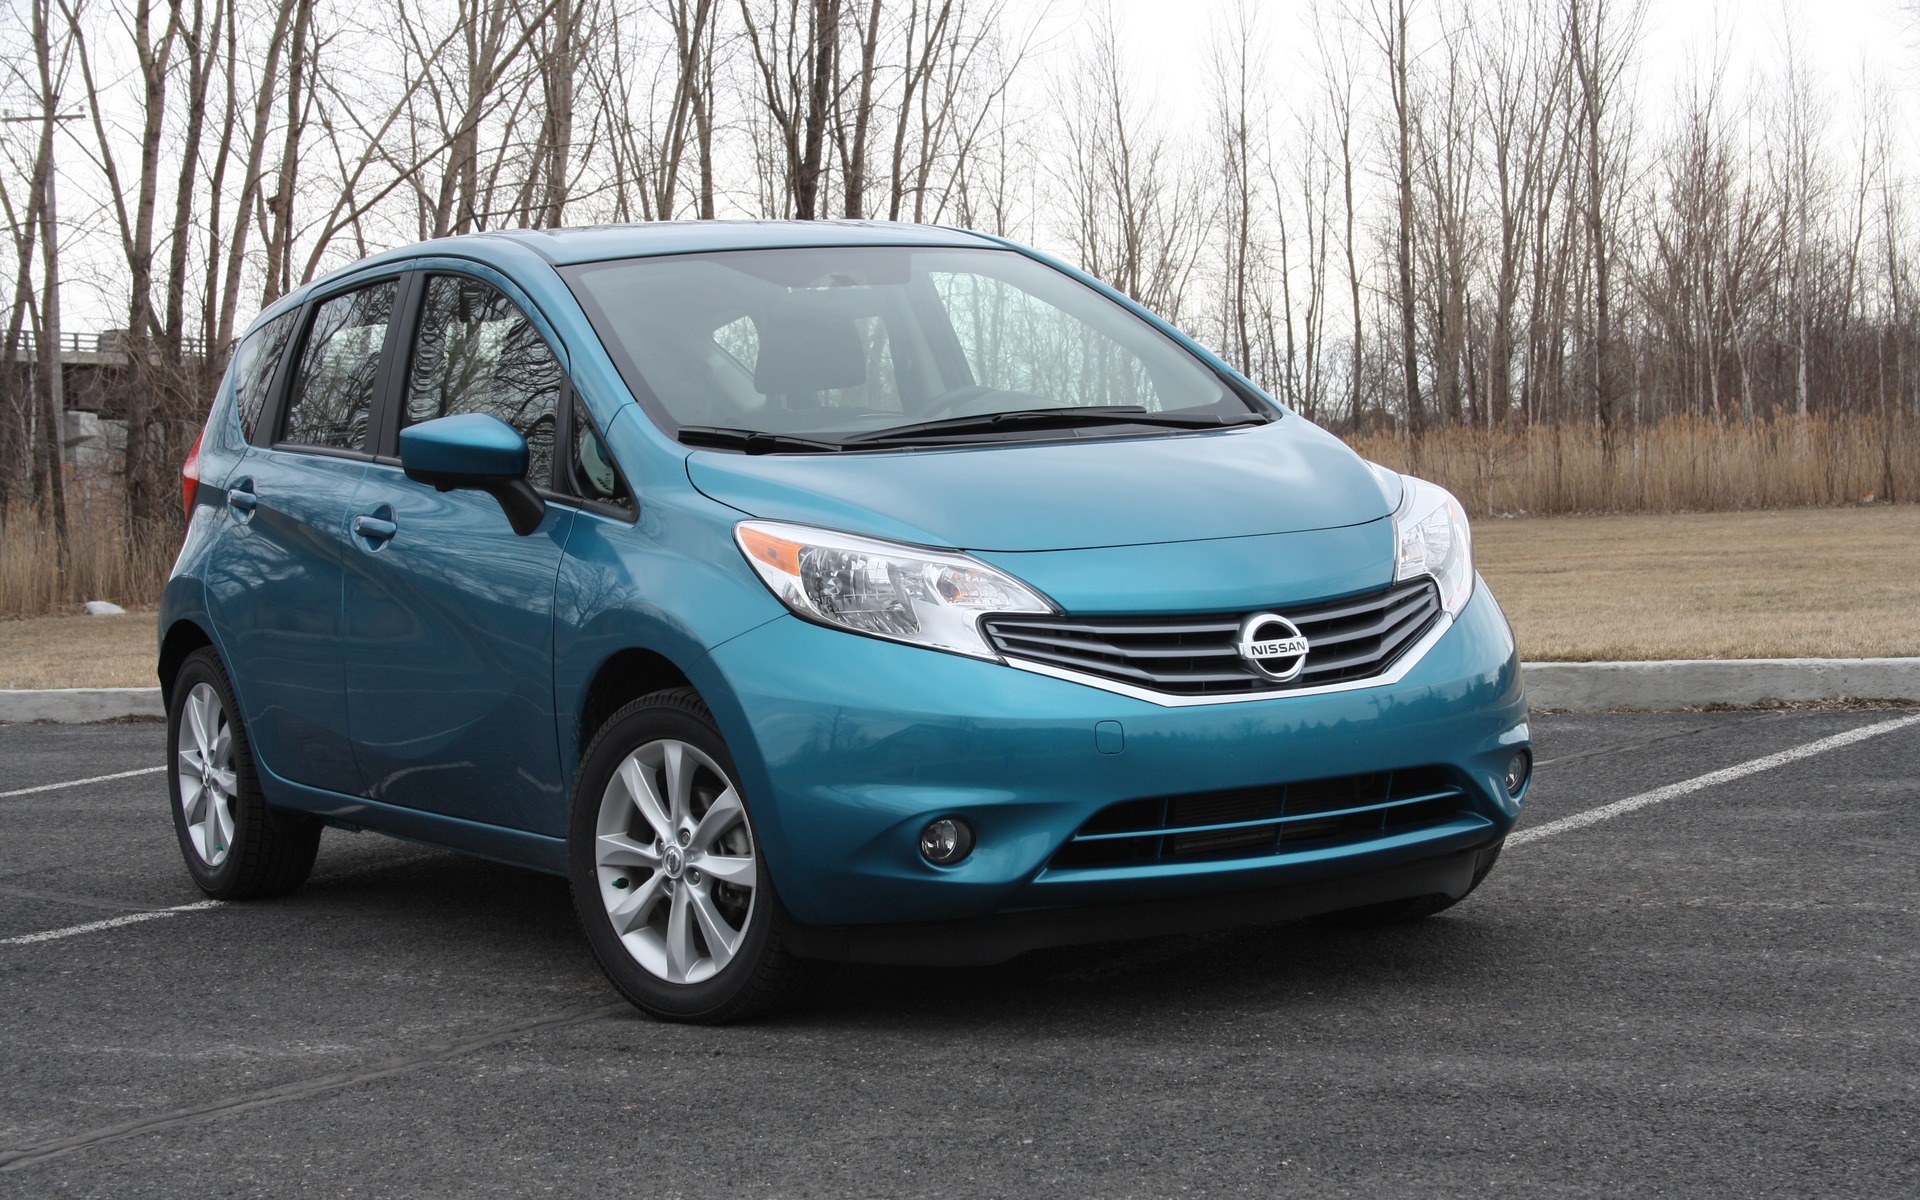 2017 Nissan Versa Note - News, reviews, picture galleries and videos - The  Car Guide